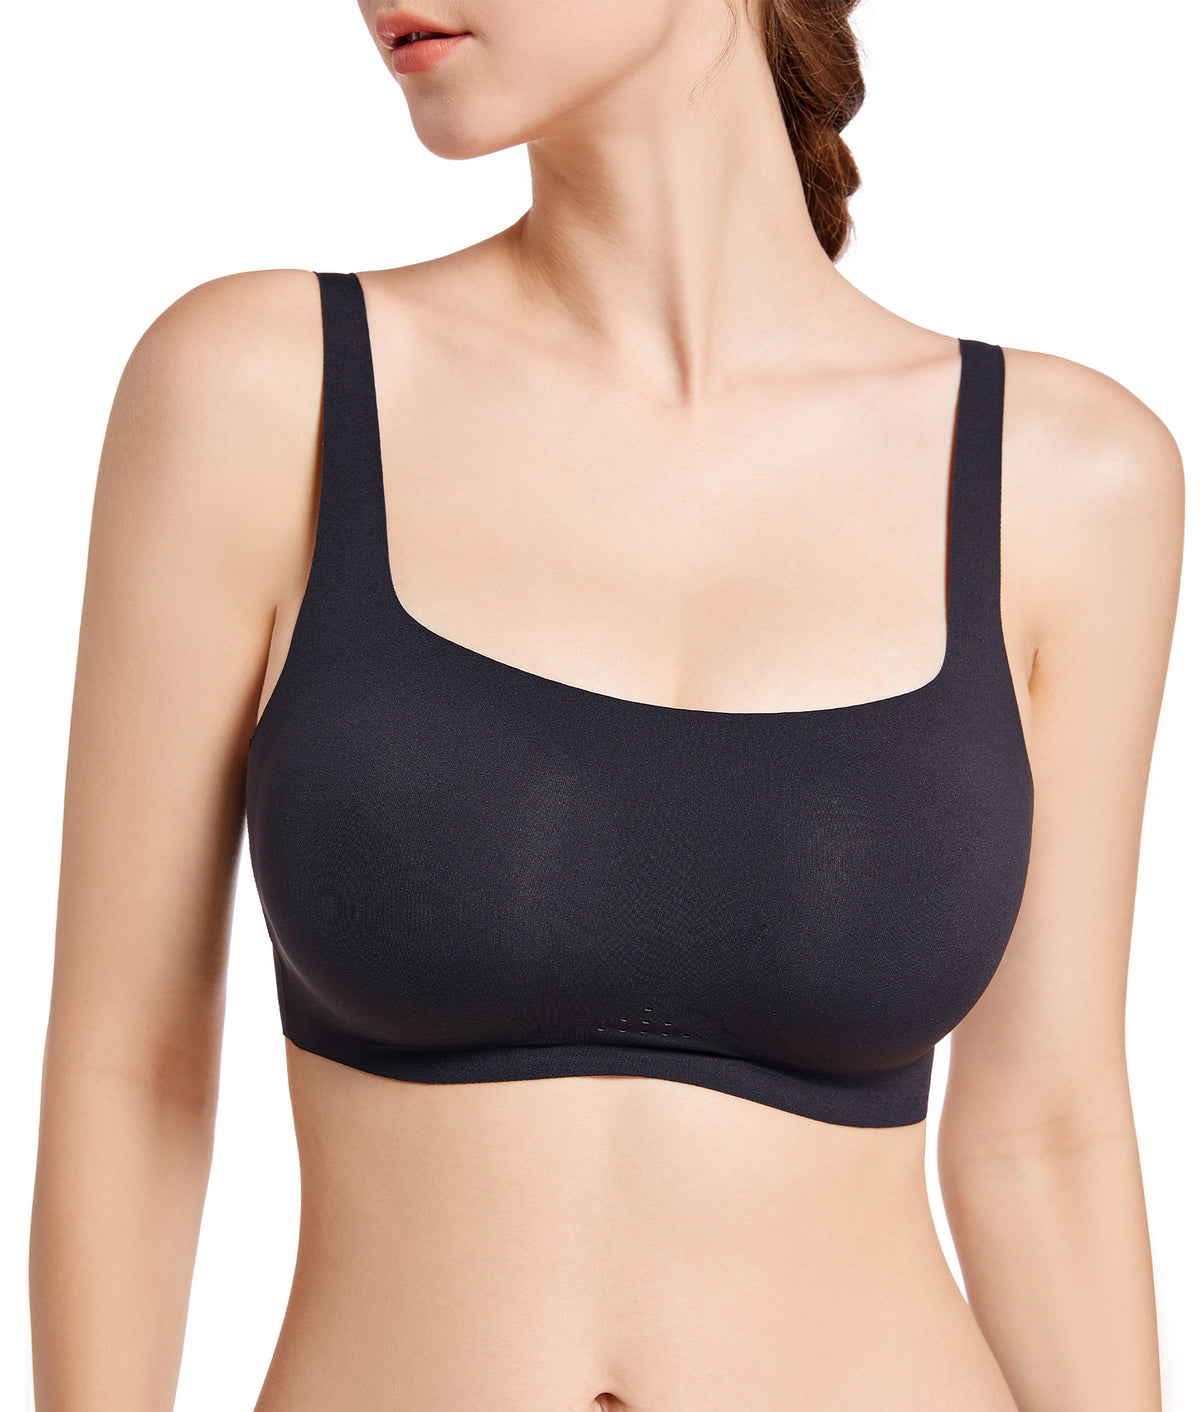 SHAPERX Wireless Scoop Bras for Women Small to Plus Size Everyday Bra with Removable Pads SHAPERX